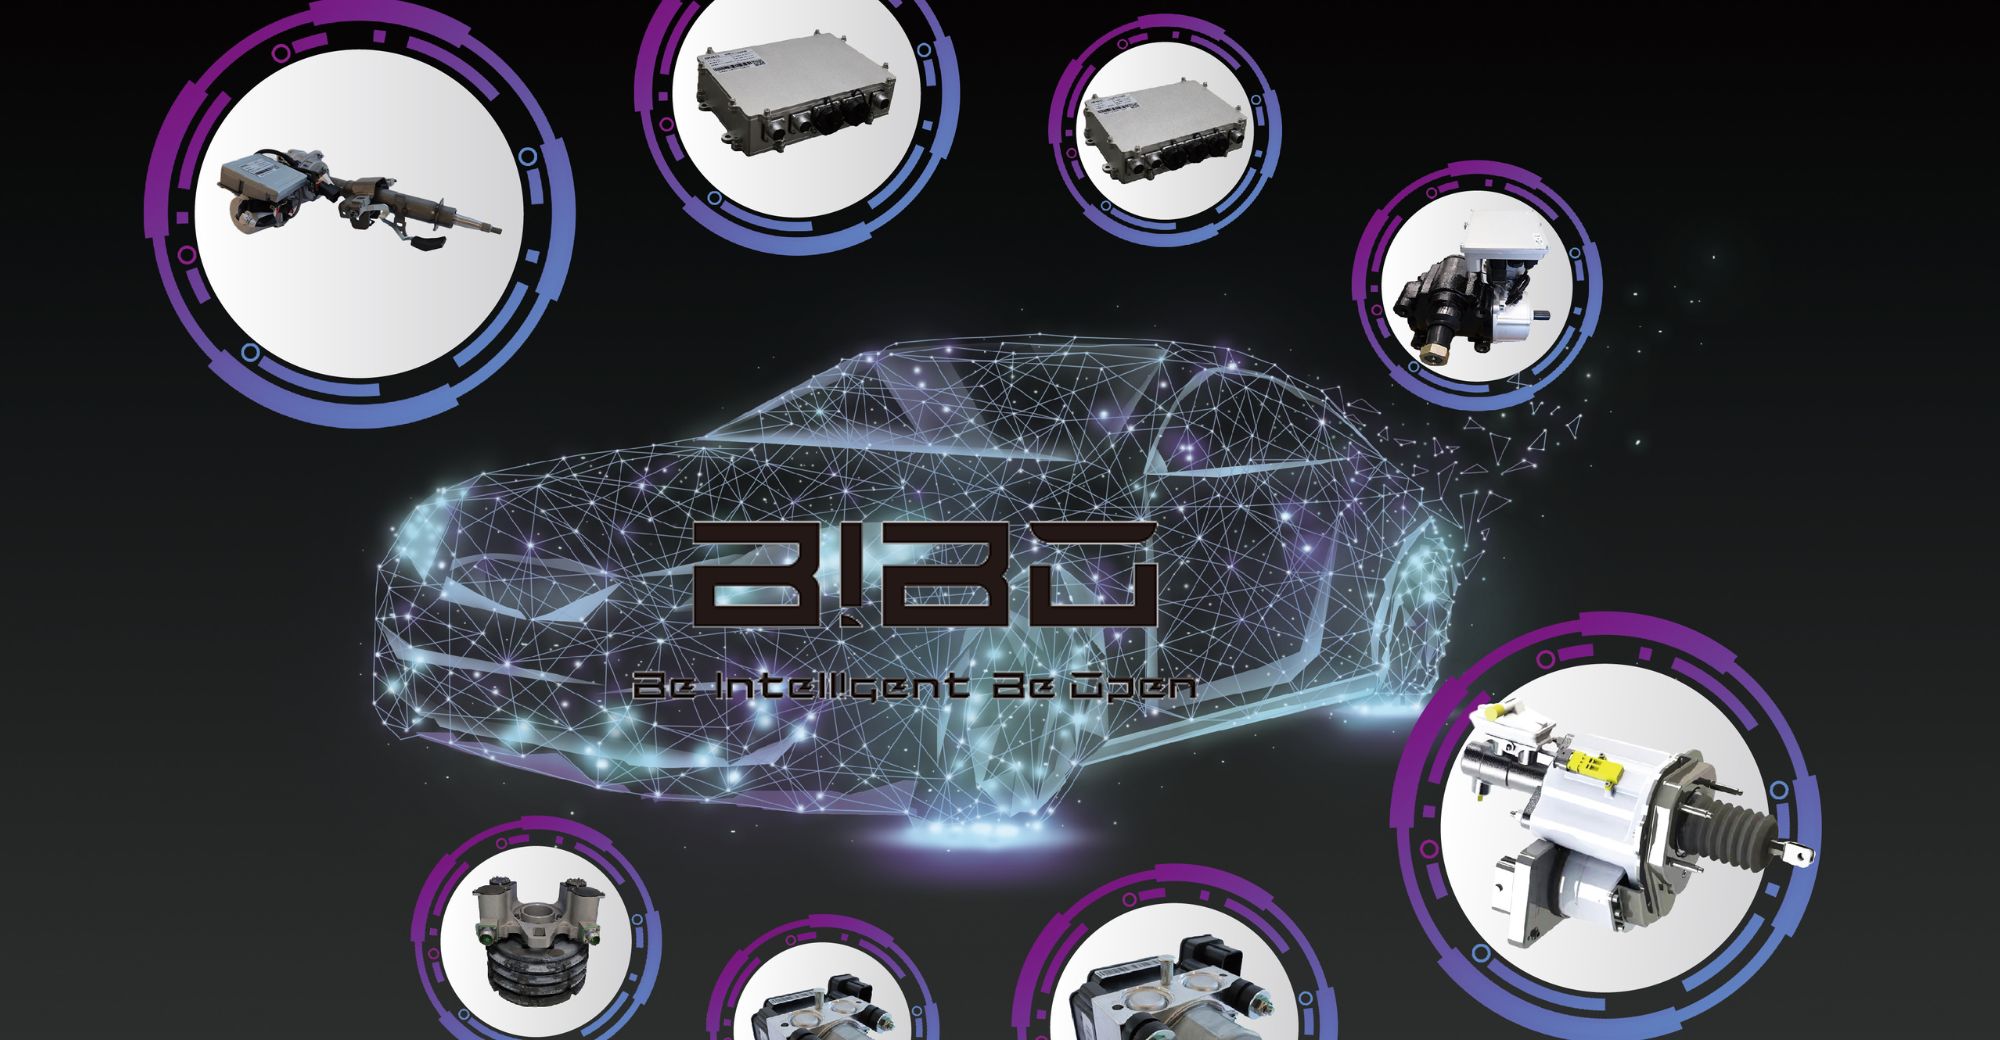 Wire Control Chassis Firm BIBO Bags Nearly 1M Yuan in Pre-A Round Financing